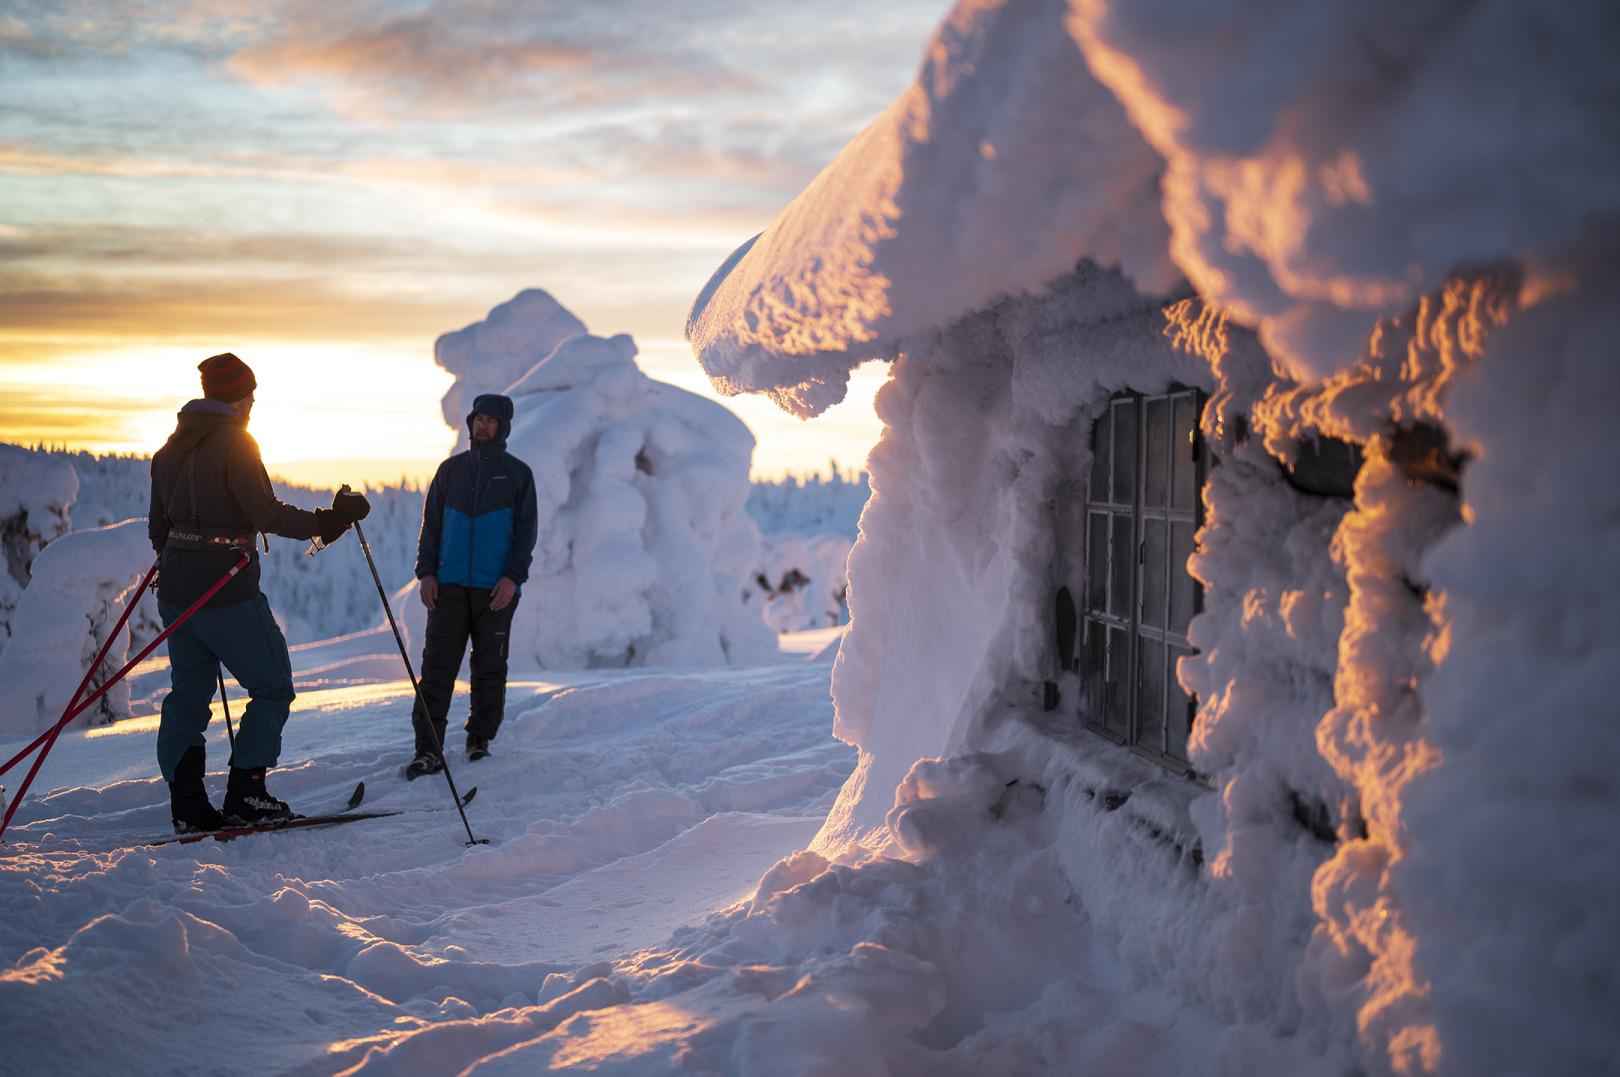 Ski-tourers by a cottage in winter landscape.